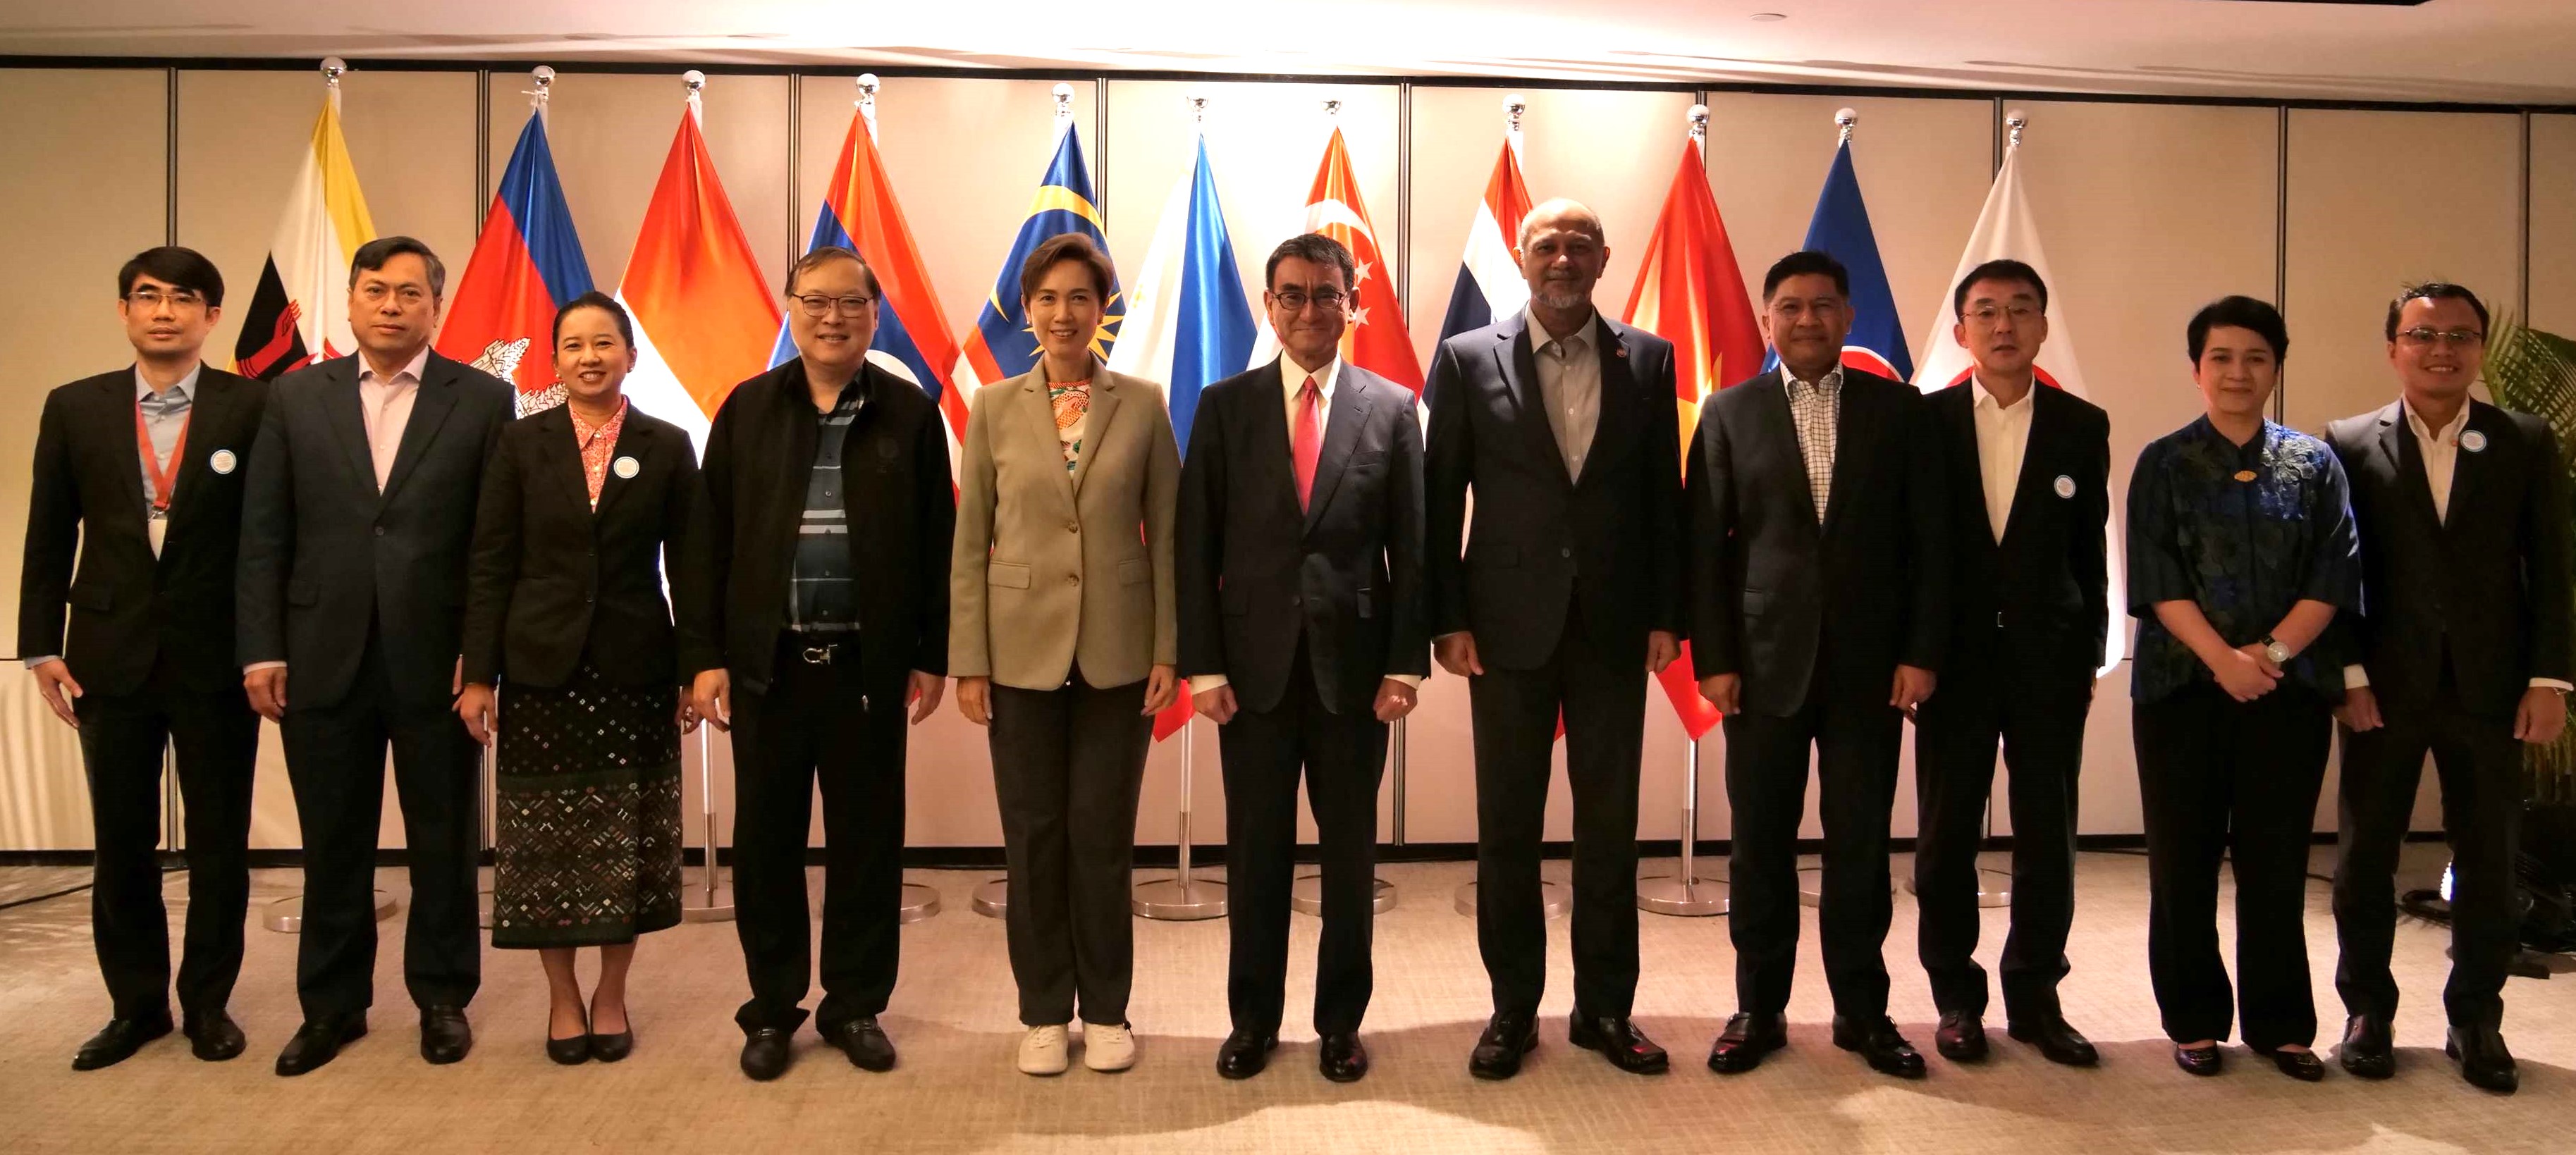 Group photo of ministers and other officials attending the ministerial meeting. Minister Kono stands at the center of the group.